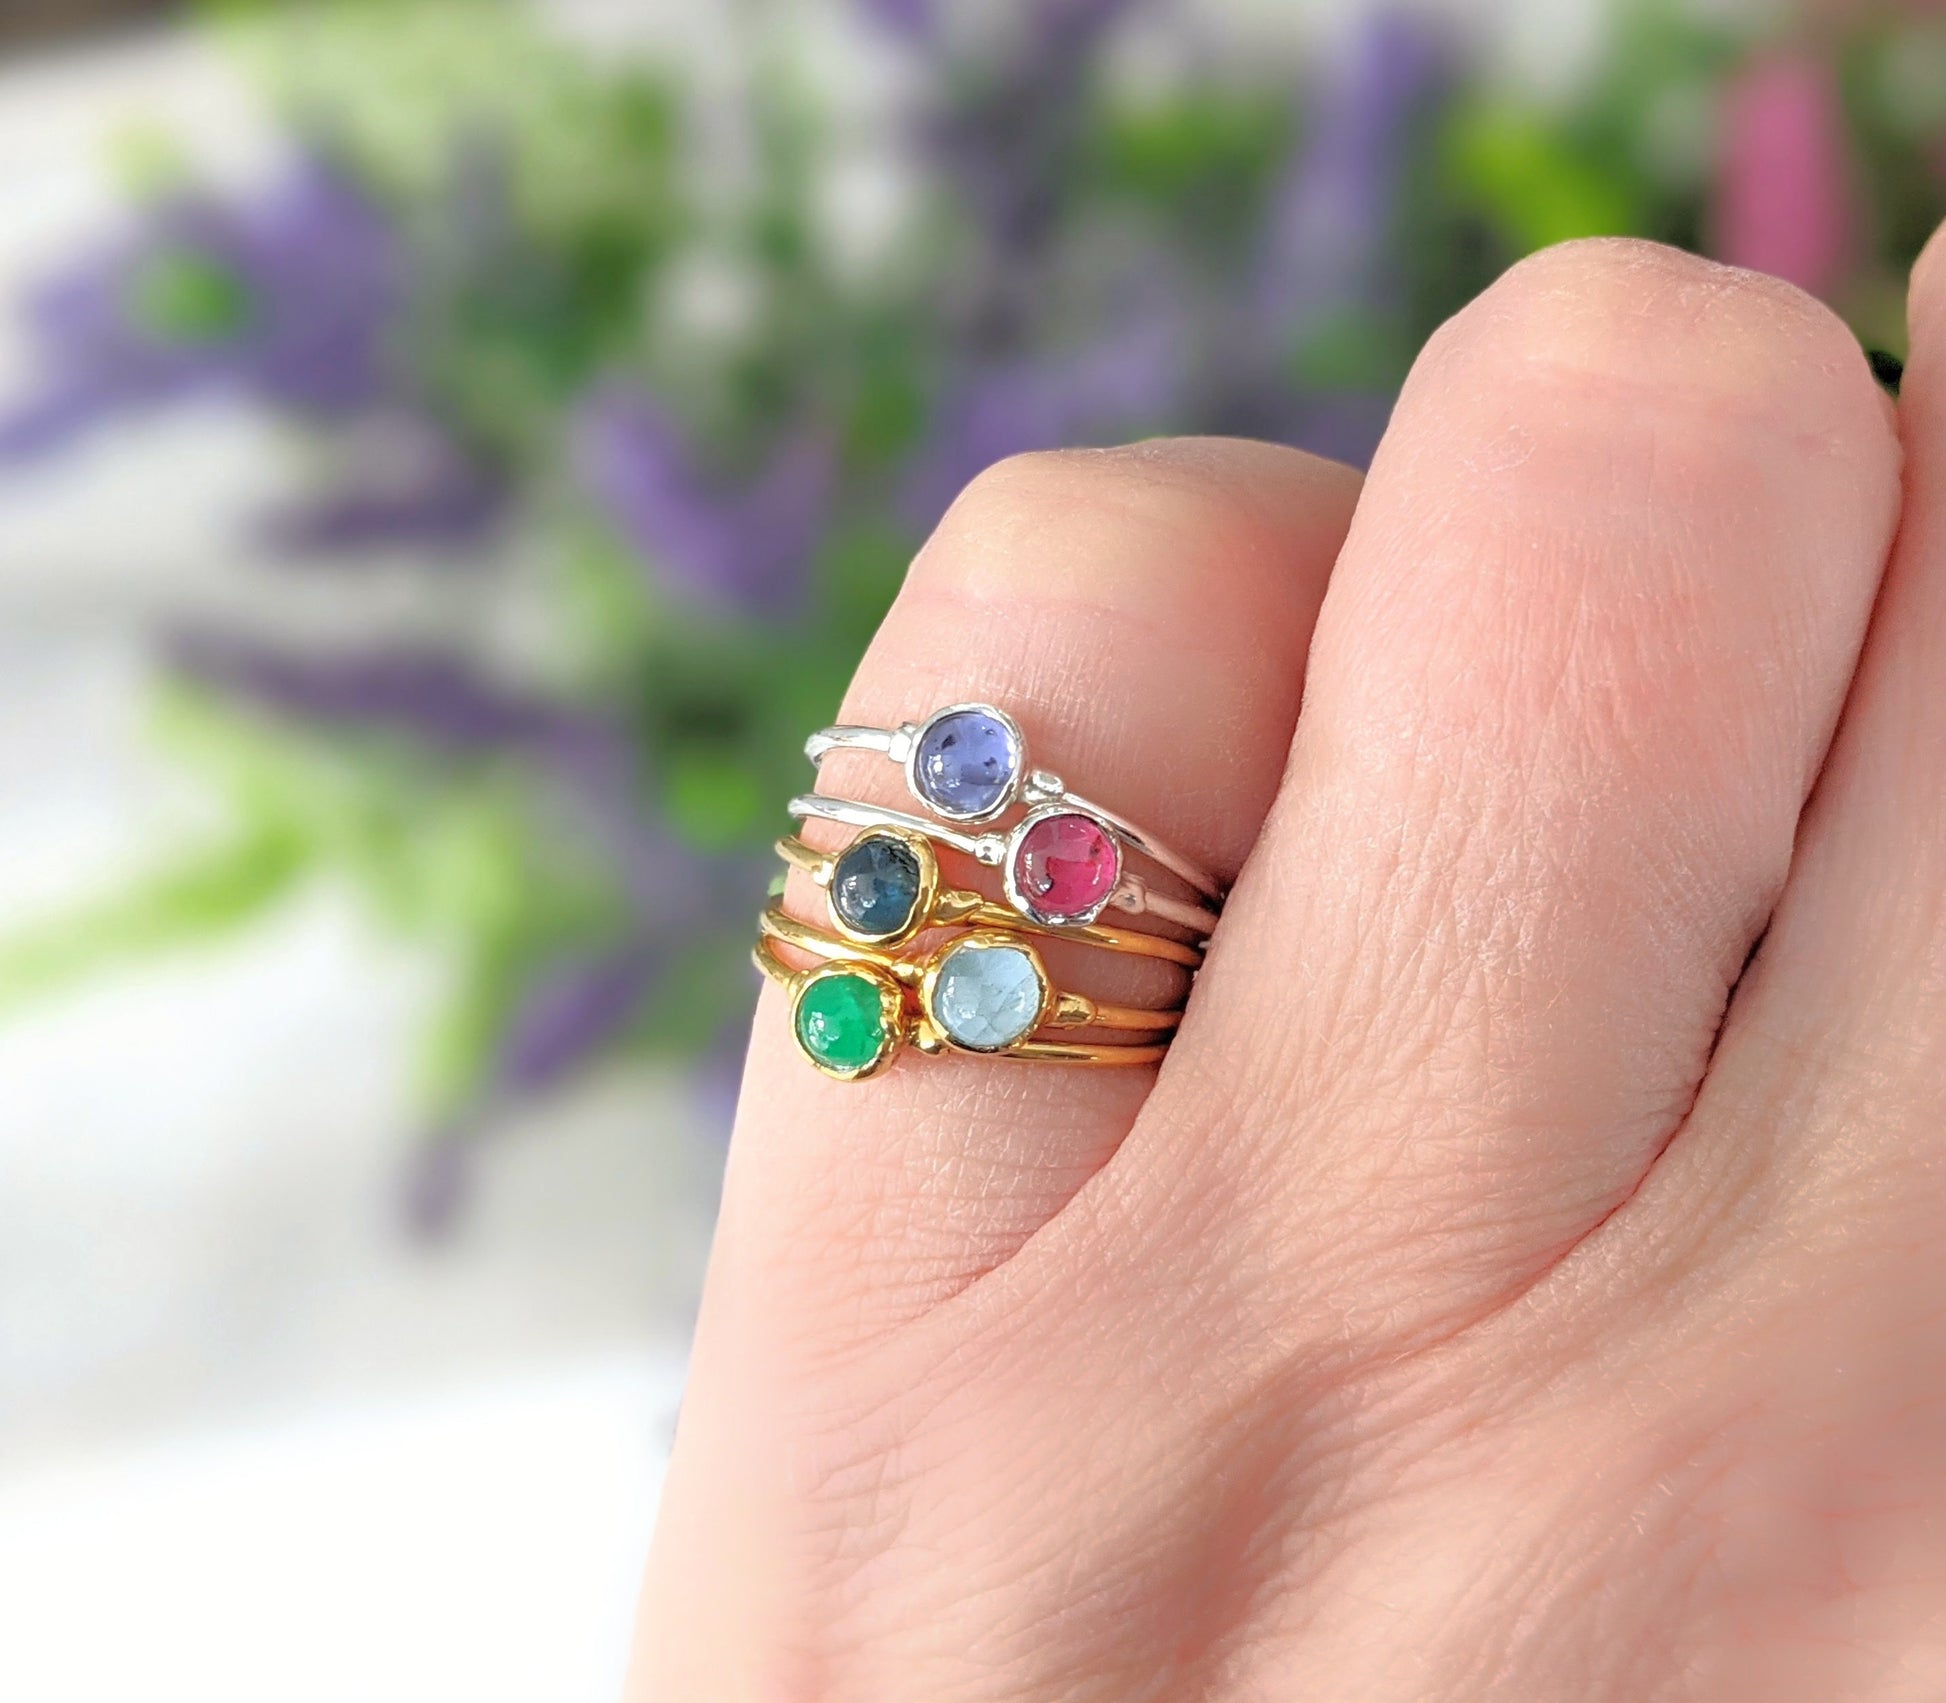 Dainty birthstone stacking rings in Sterling silver or 18k Gold